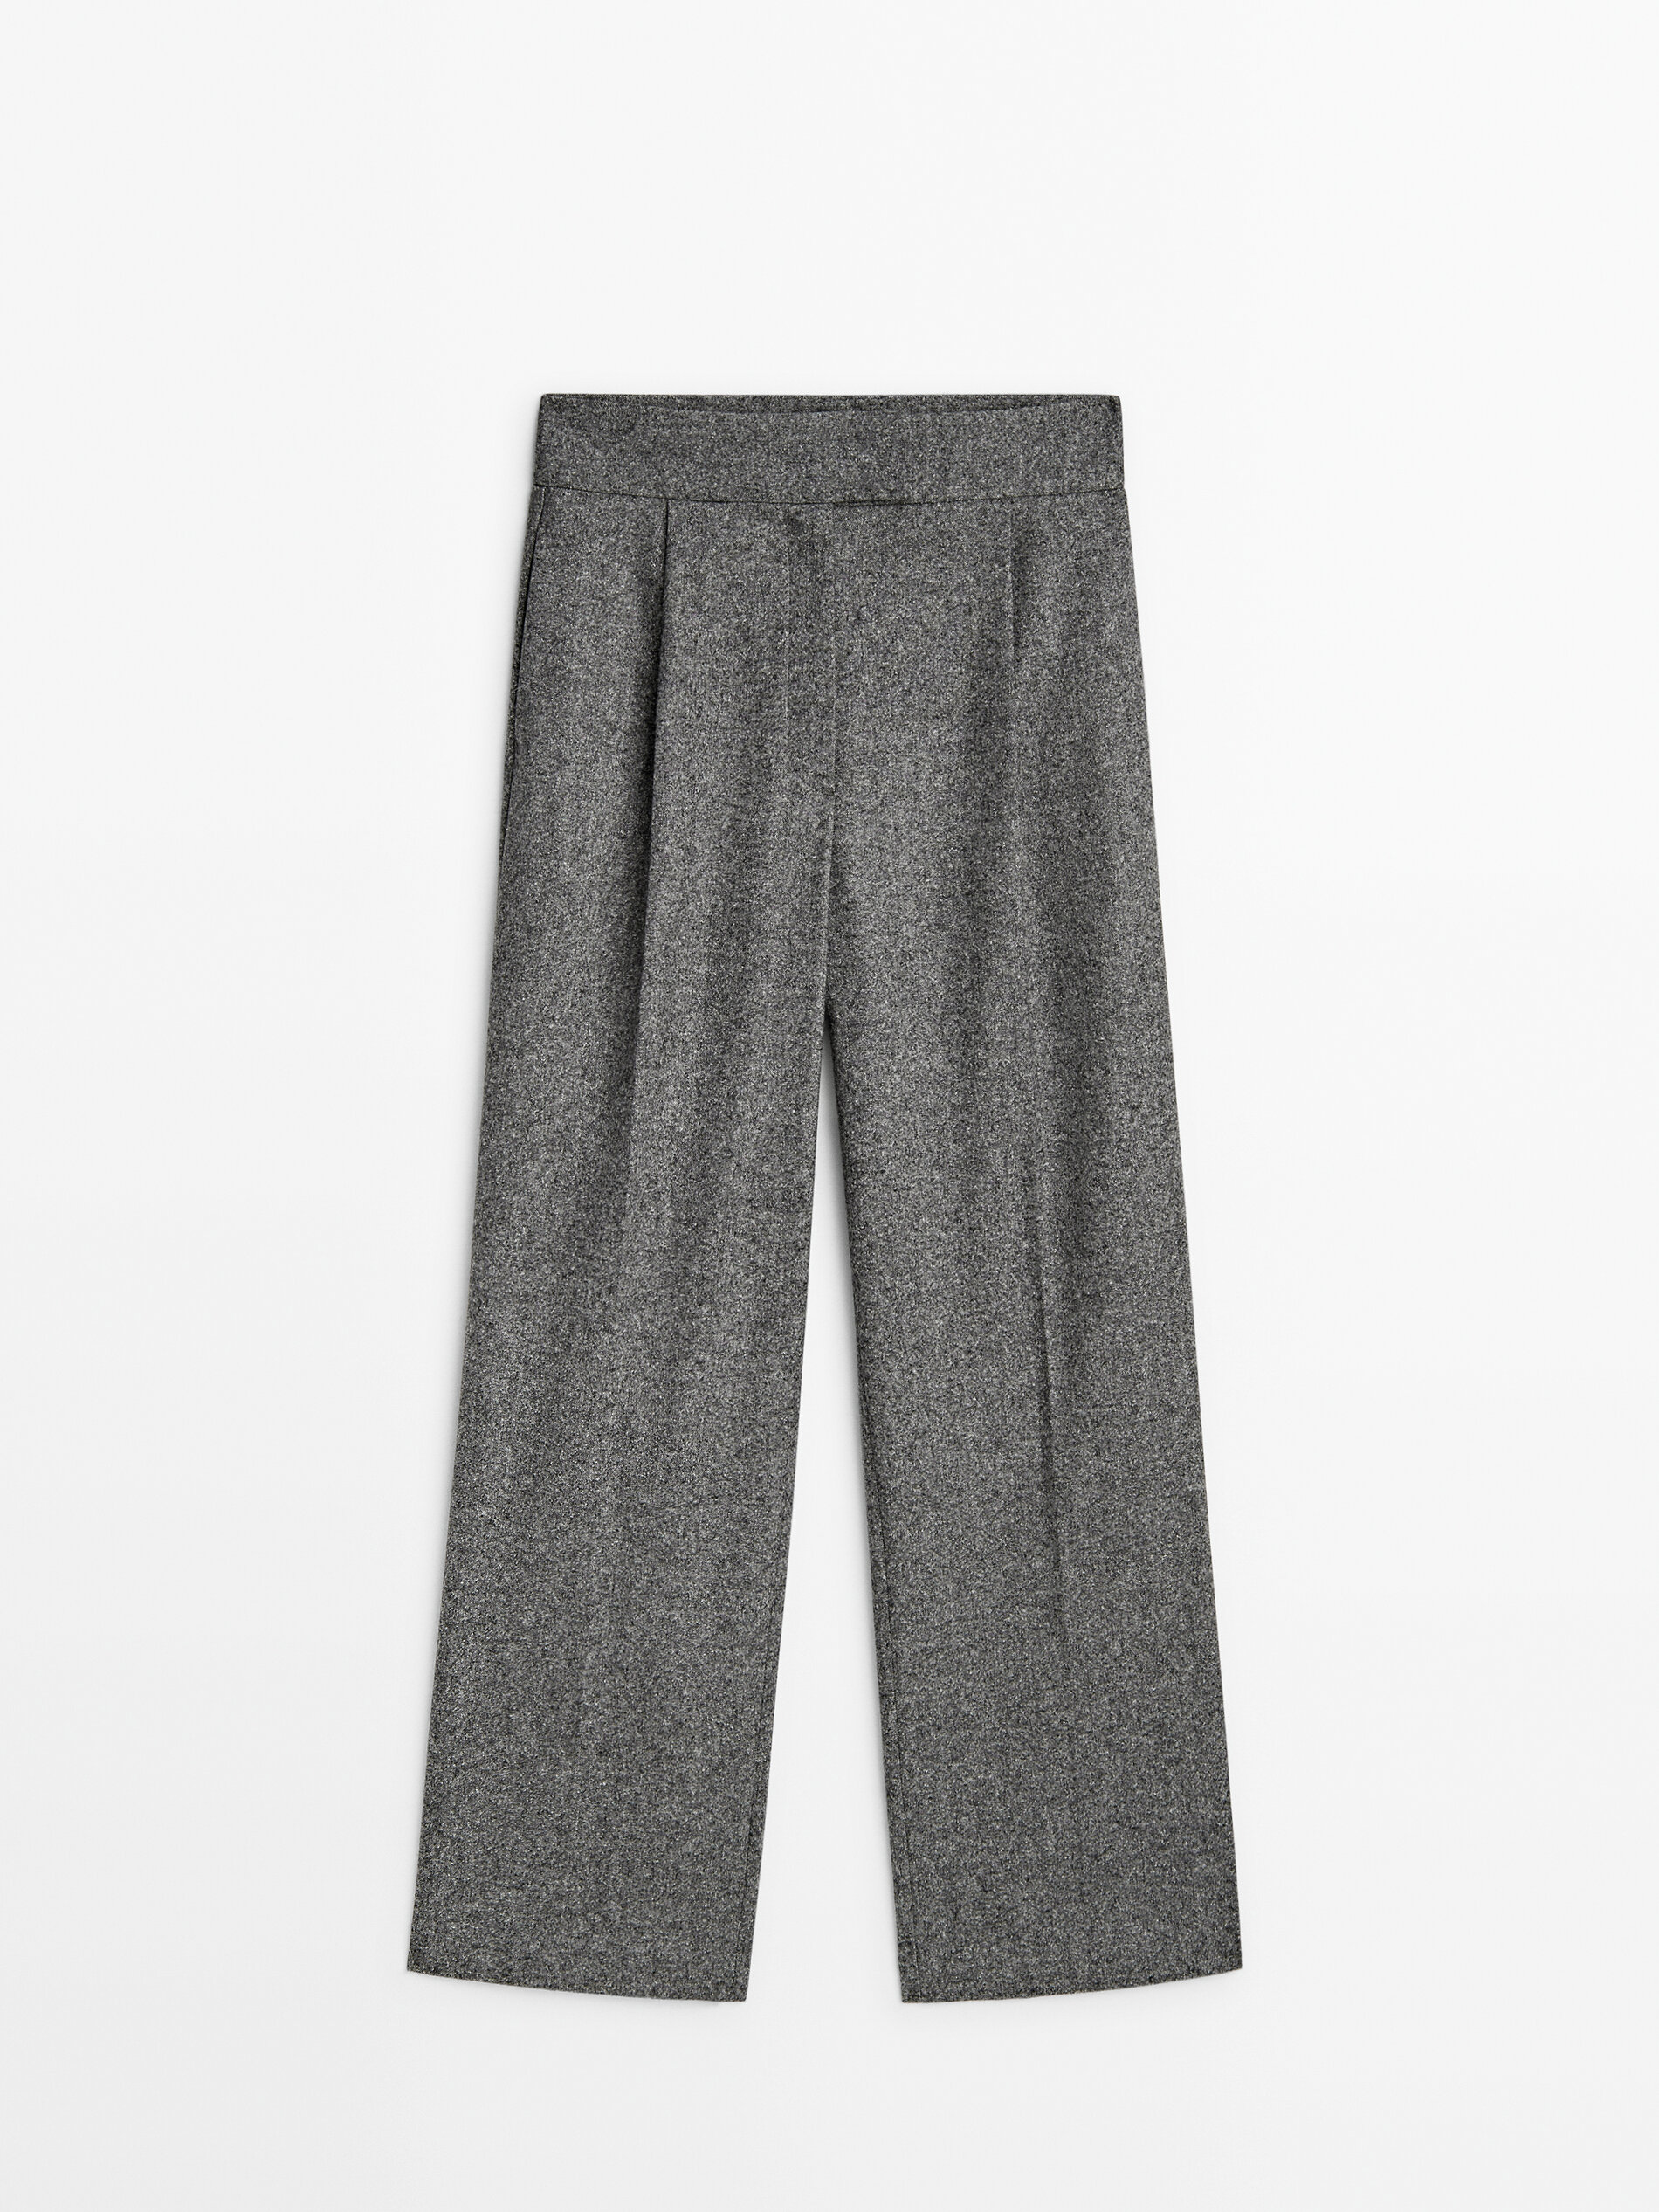 Avery Slim Wool-Blend Pant | Banana Republic | Pants for women, Shopping  outfit, Clothes